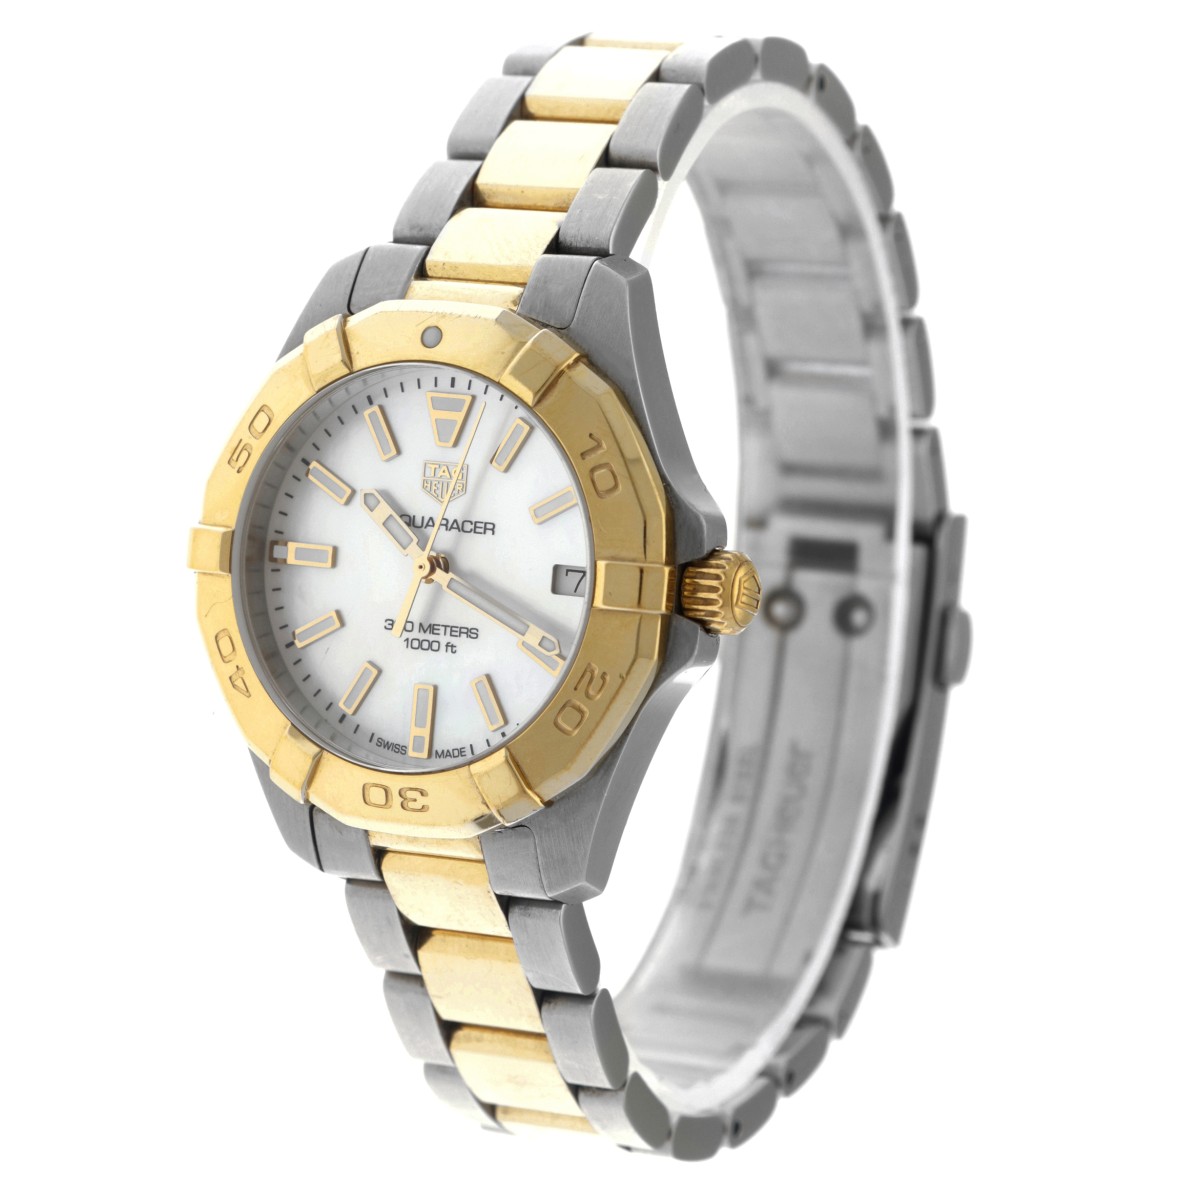 Tag Heuer Aquaracer Lady Mother of Pearl WBD1320 - Ladies watch - 2020. - Image 2 of 6